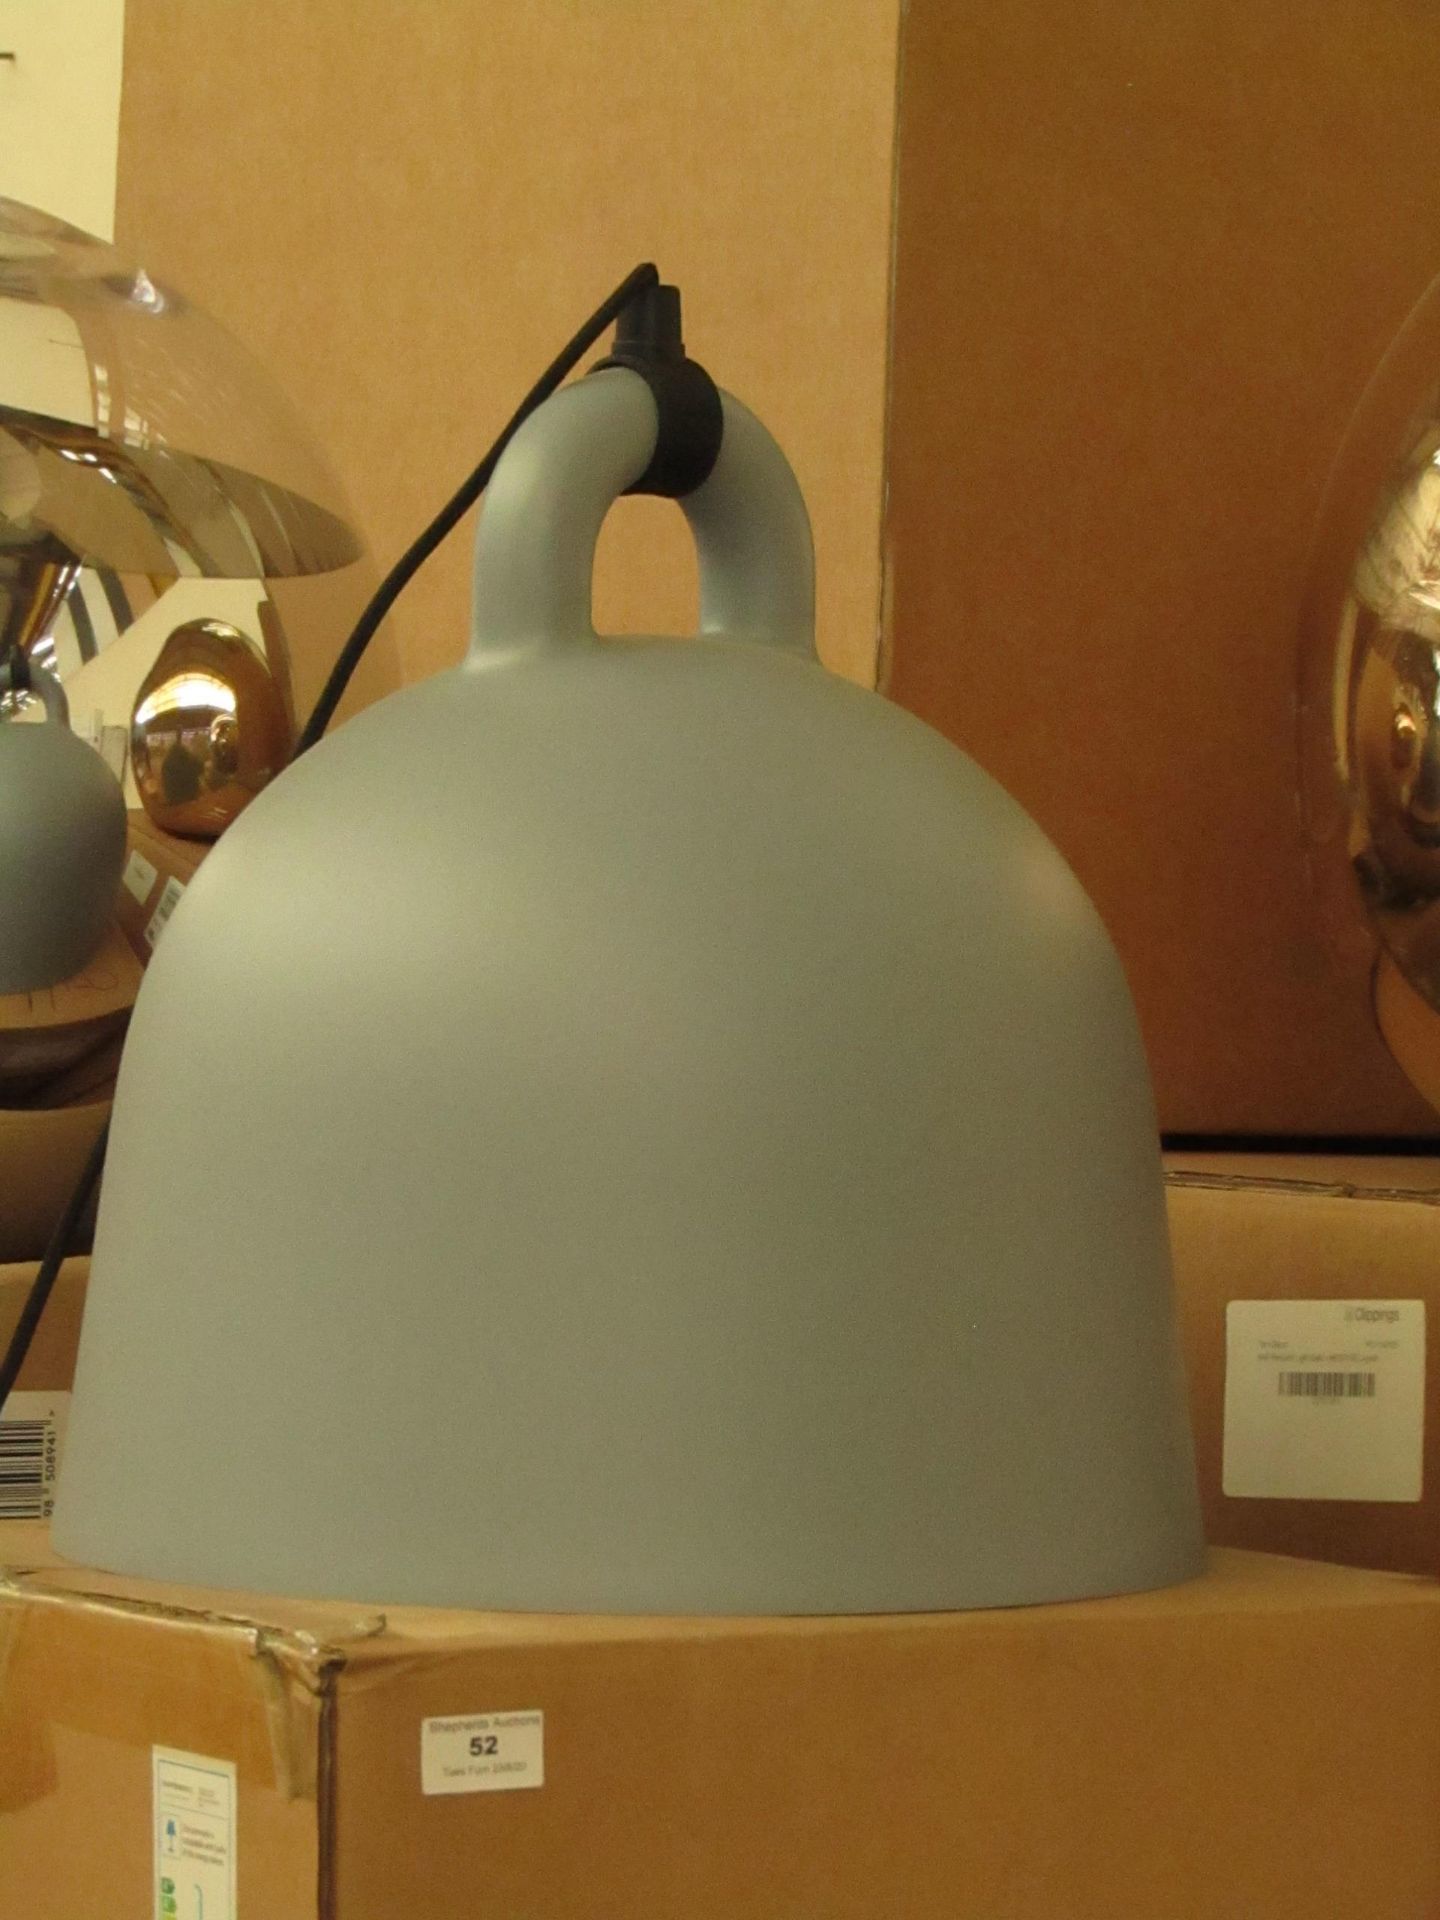 | 1X | NORMANN COPENHAGEN BELL SMALL CEILING LIGHT| UNCHECKED AND BOXED | RRP £227 |